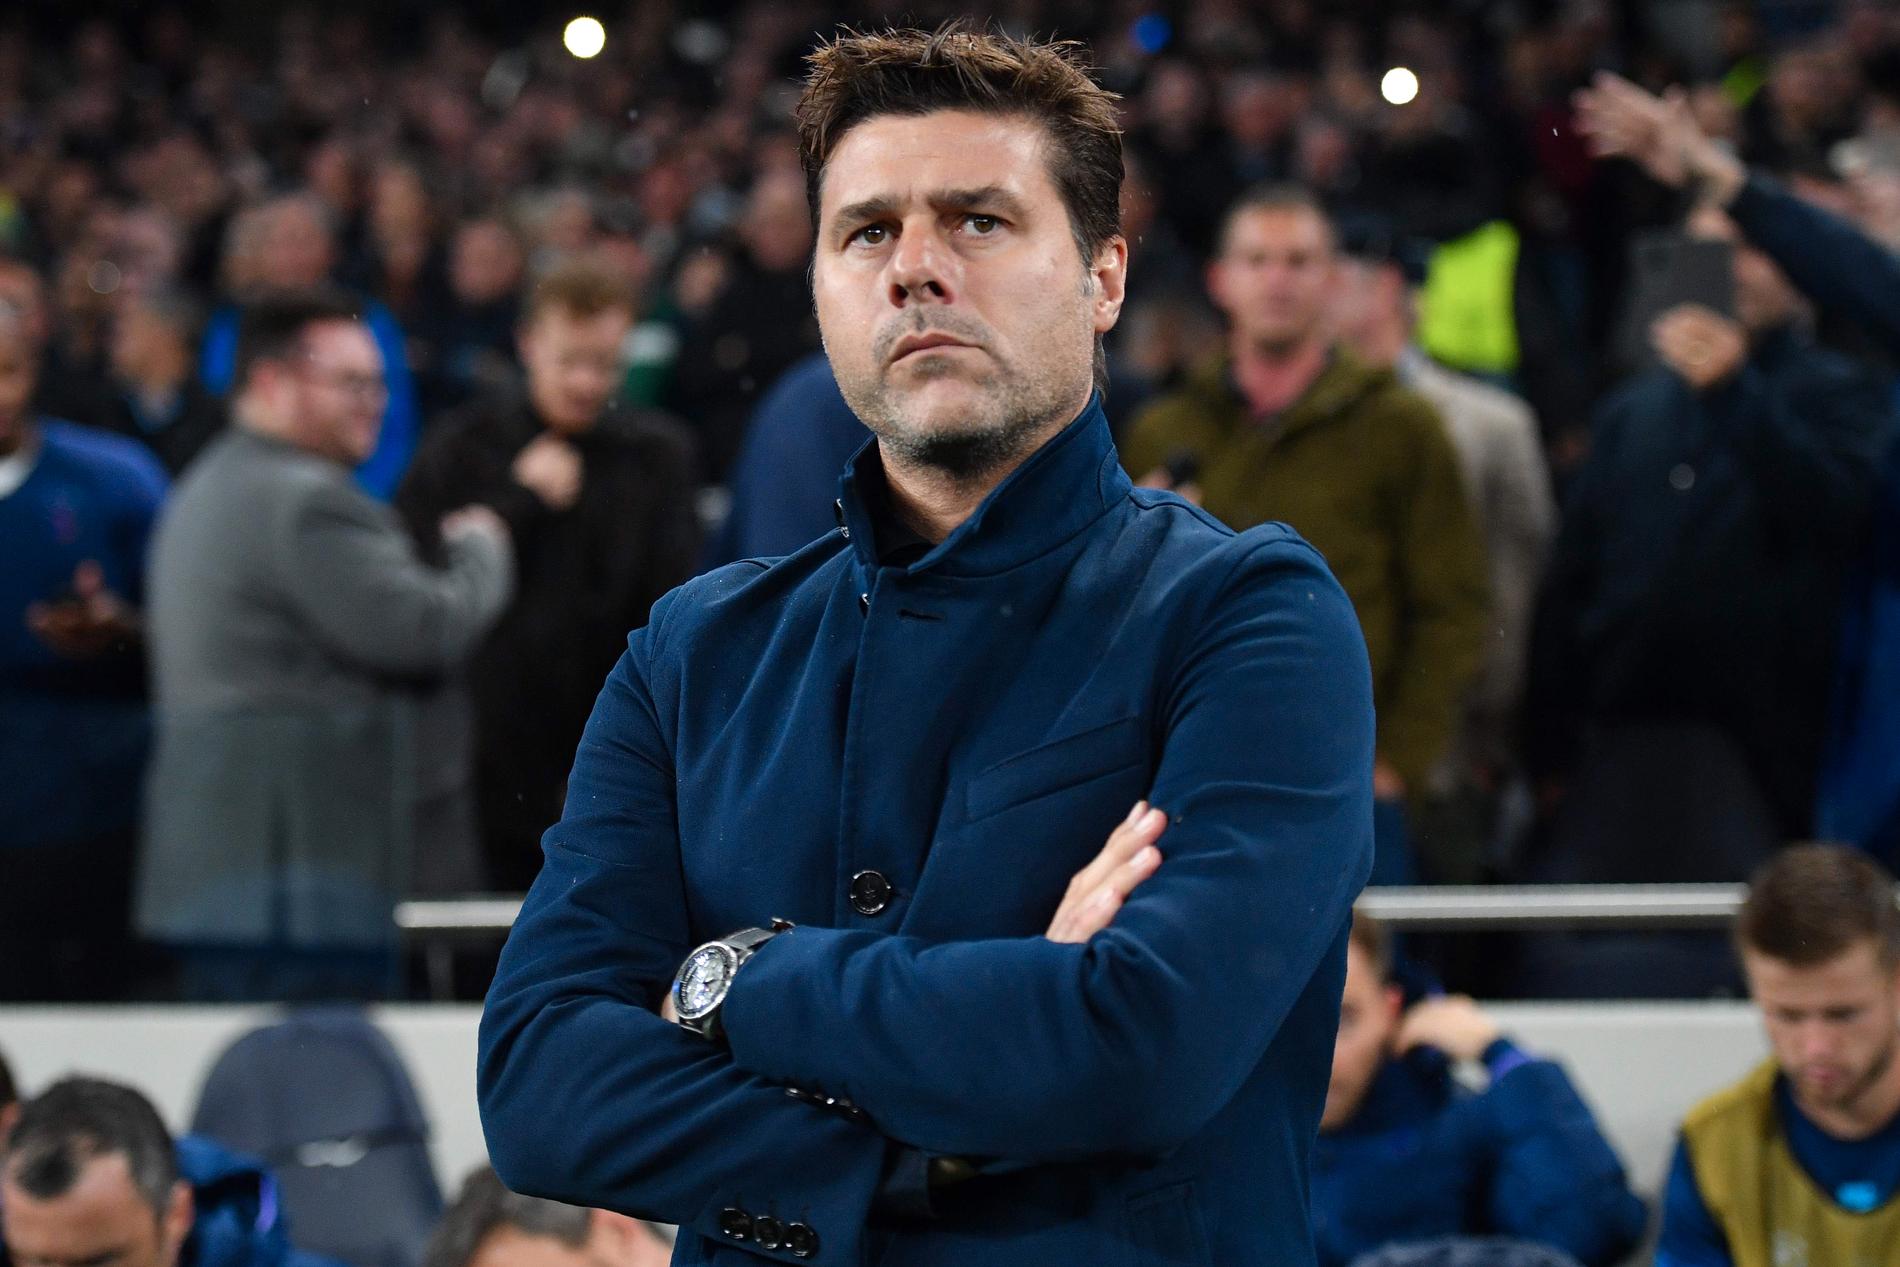 The Athlete: Mauricio Pochettino is the new Chelsea manager